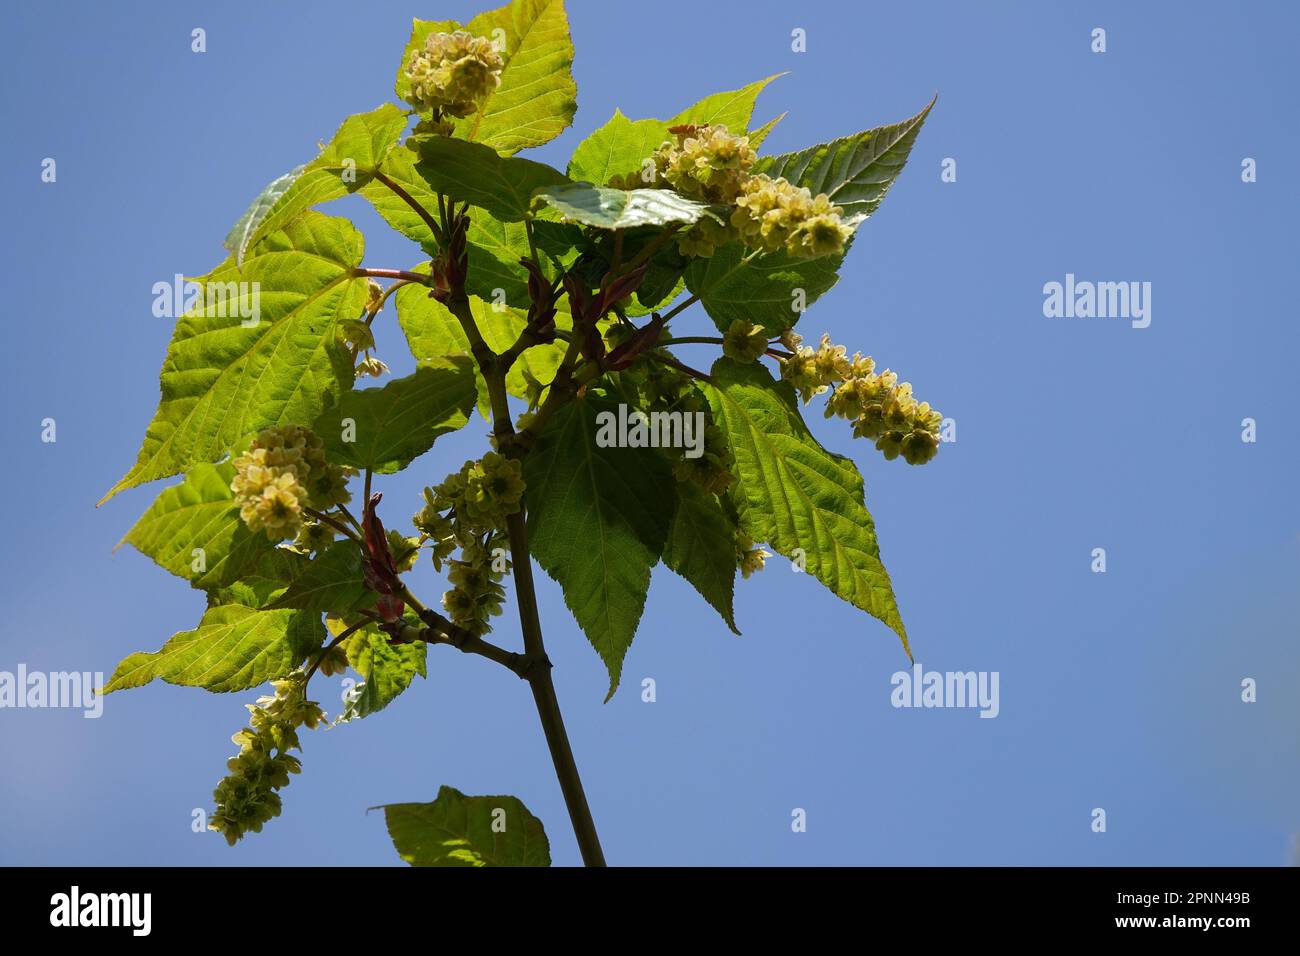 Spring, New,Leaves, Flower, Branch, Maple, Green, Foliage, Deciduous, Plant, Acer pectinatum 'Maximowiczii' Stock Photo